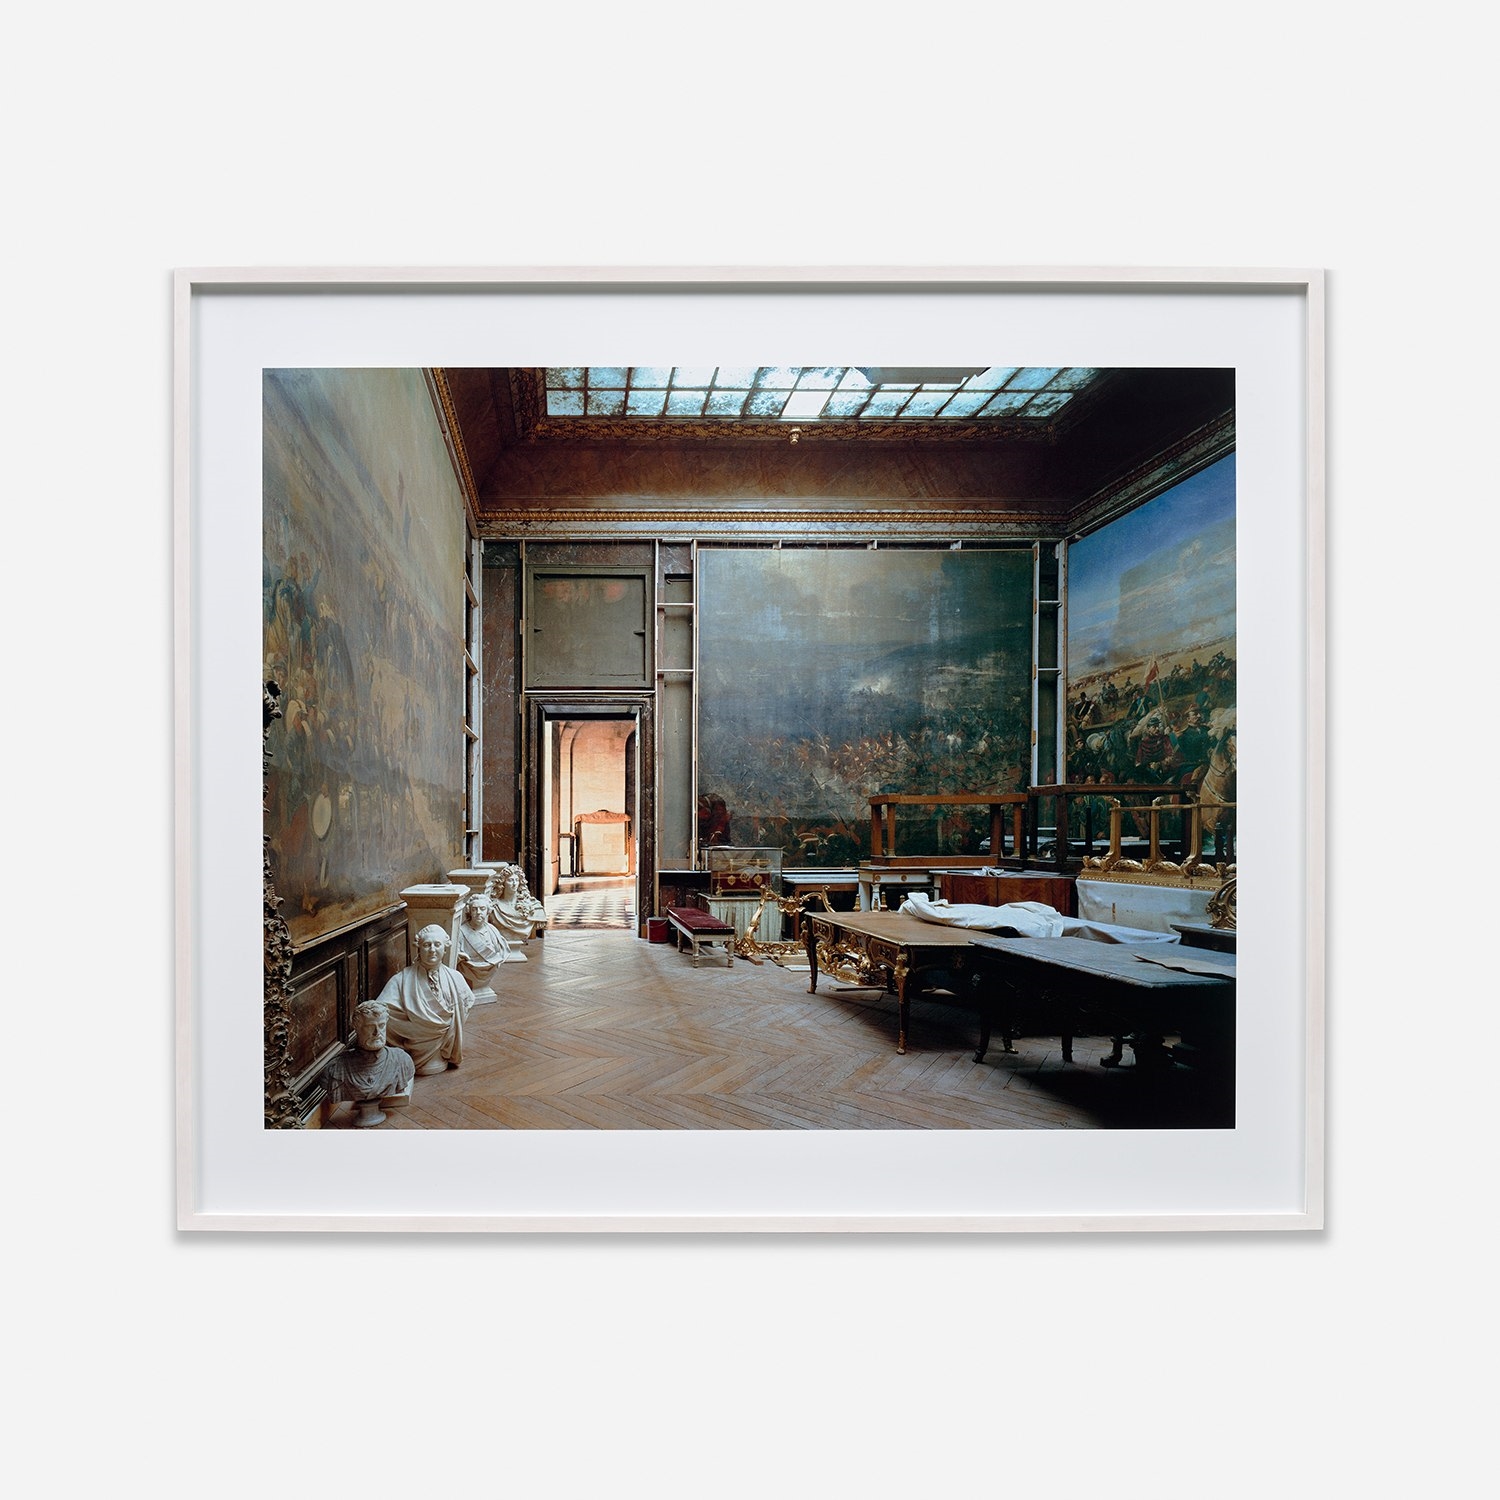 Artwork by Robert Polidori, Salle de L’Afrique, No. 5, Chateau de Versailles, Made of Chromogenic print, printed later, mounted.